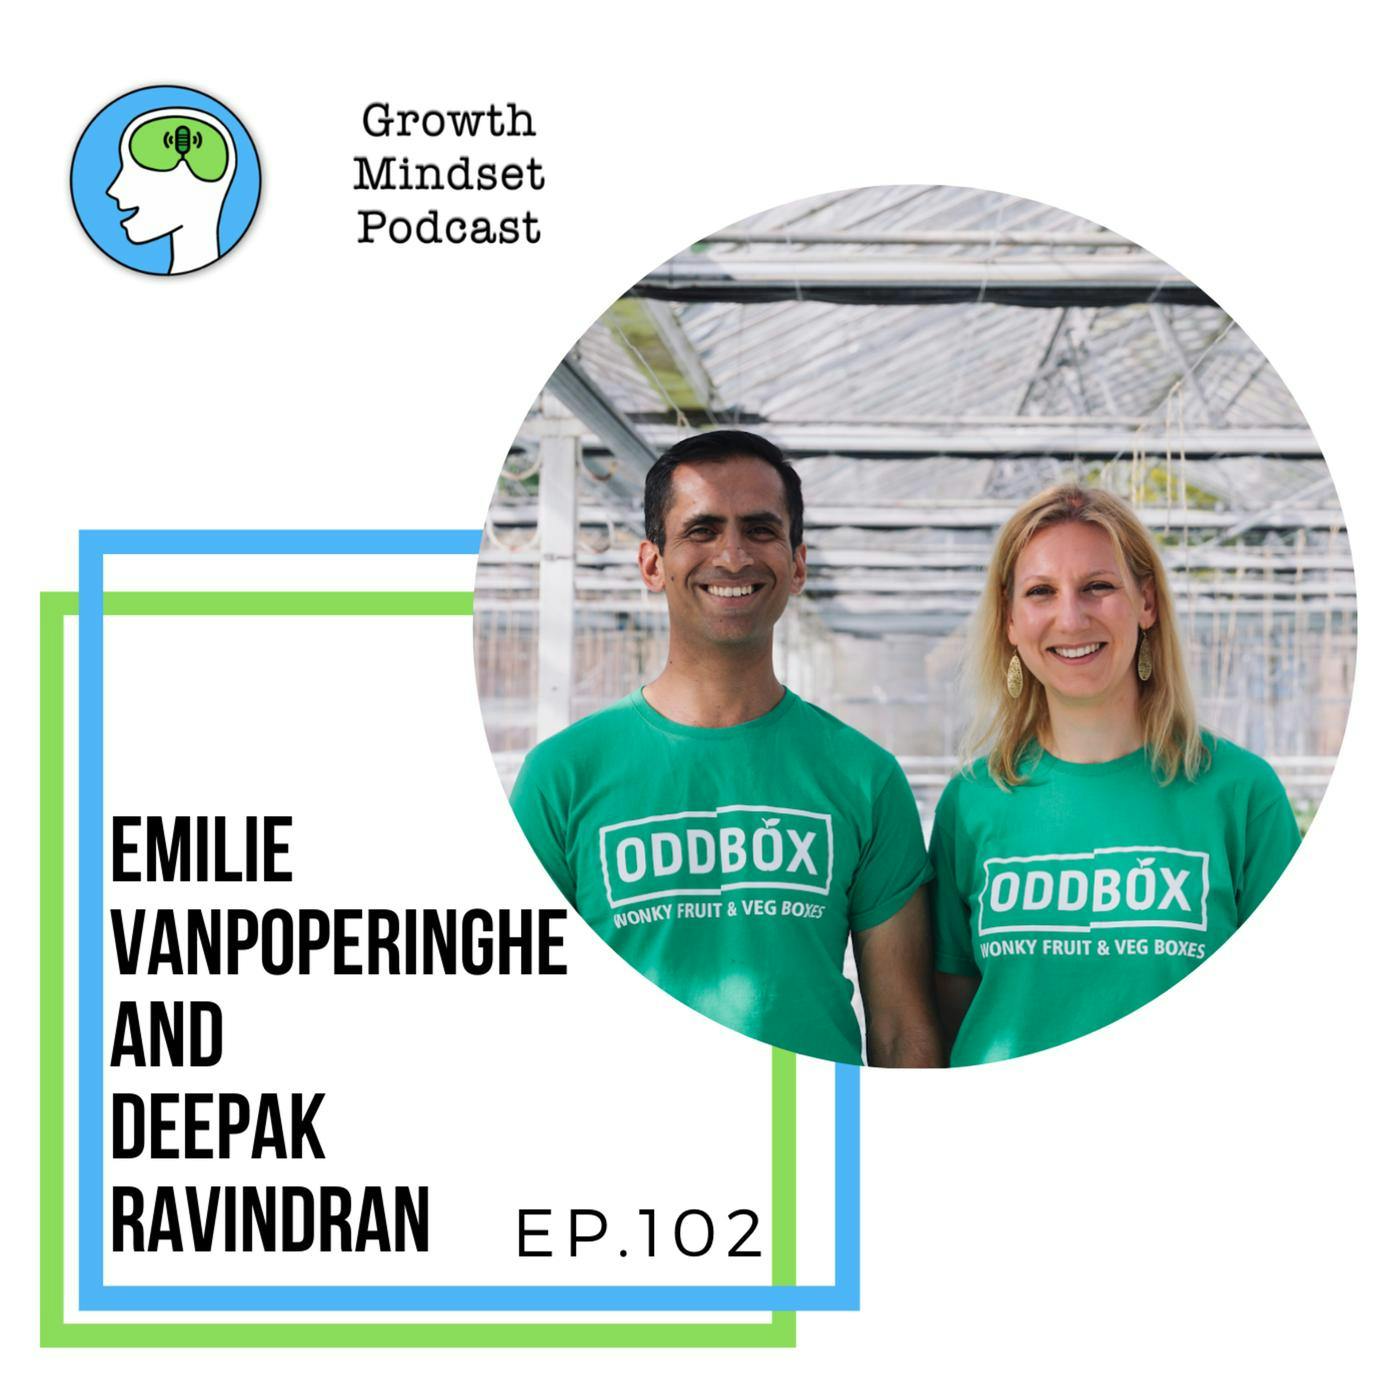 99: Things Don't Need to be Perfect - OddBox co-founders, Deepak Ravindran and Emilie Vanpoperinghe